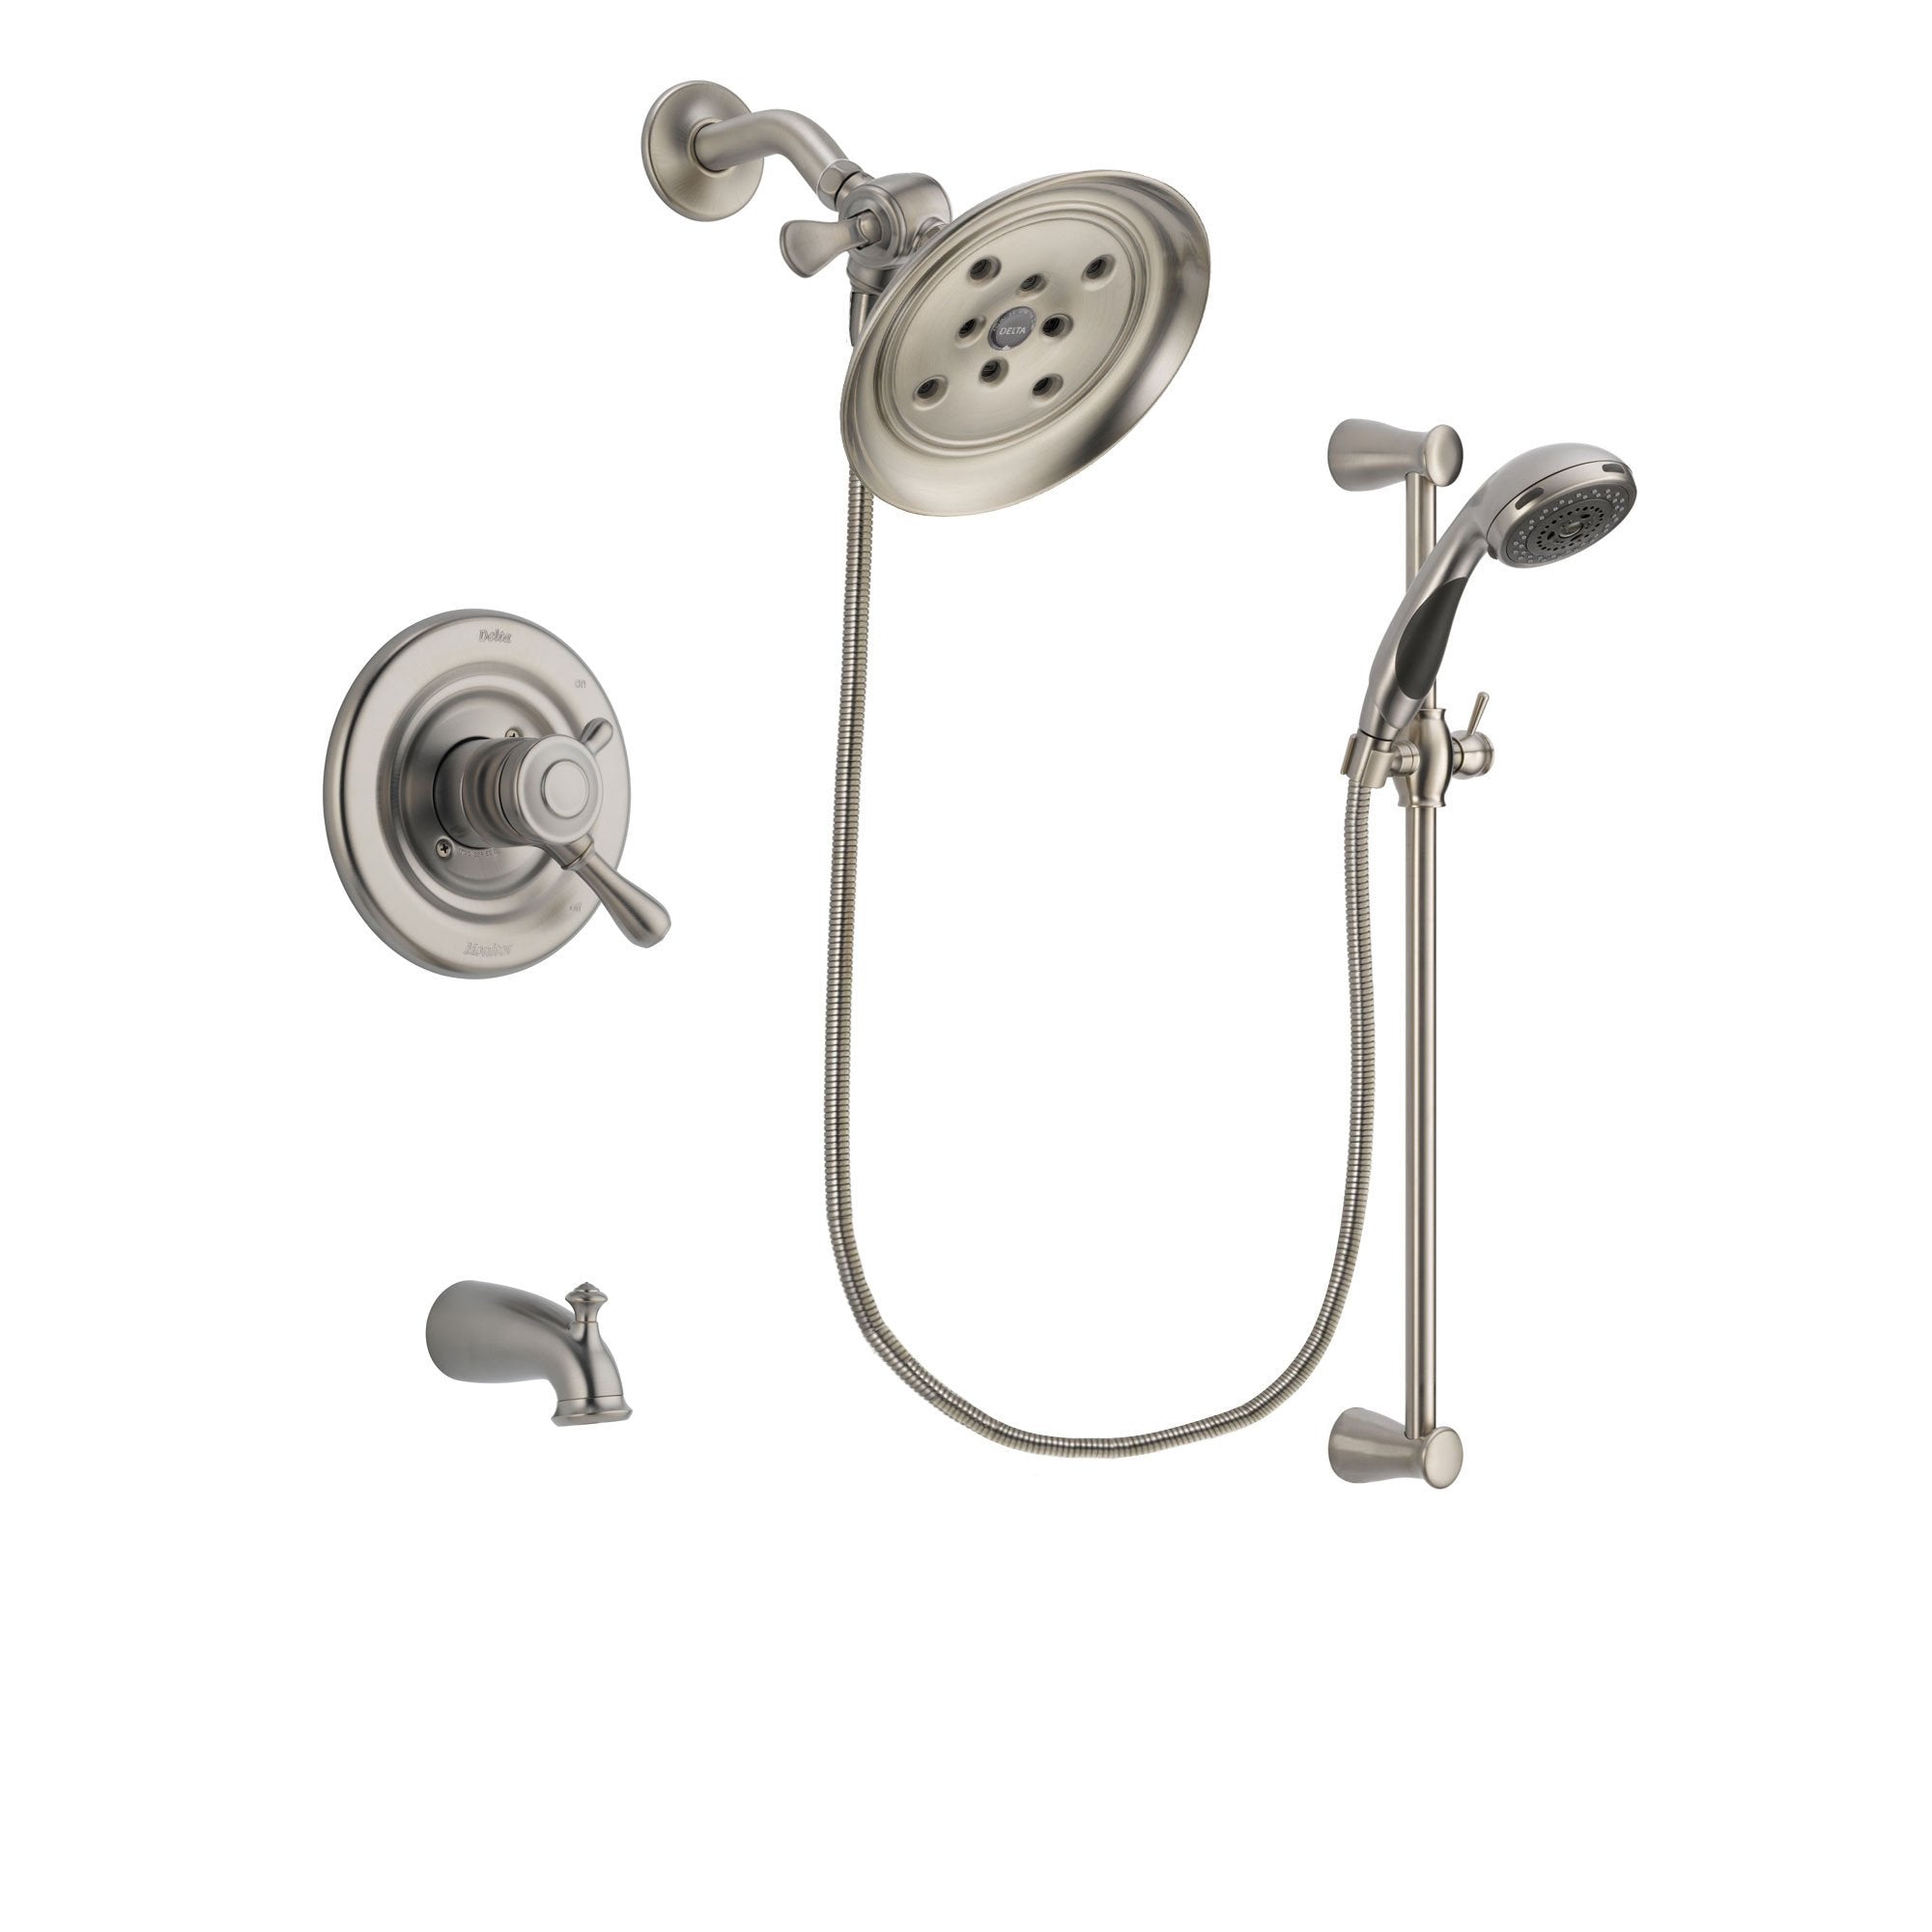 Delta Leland Stainless Steel Finish Dual Control Tub and Shower Faucet System Package with Large Rain Showerhead and Handheld Shower Spray with Slide Bar Includes Rough-in Valve and Tub Spout DSP1607V